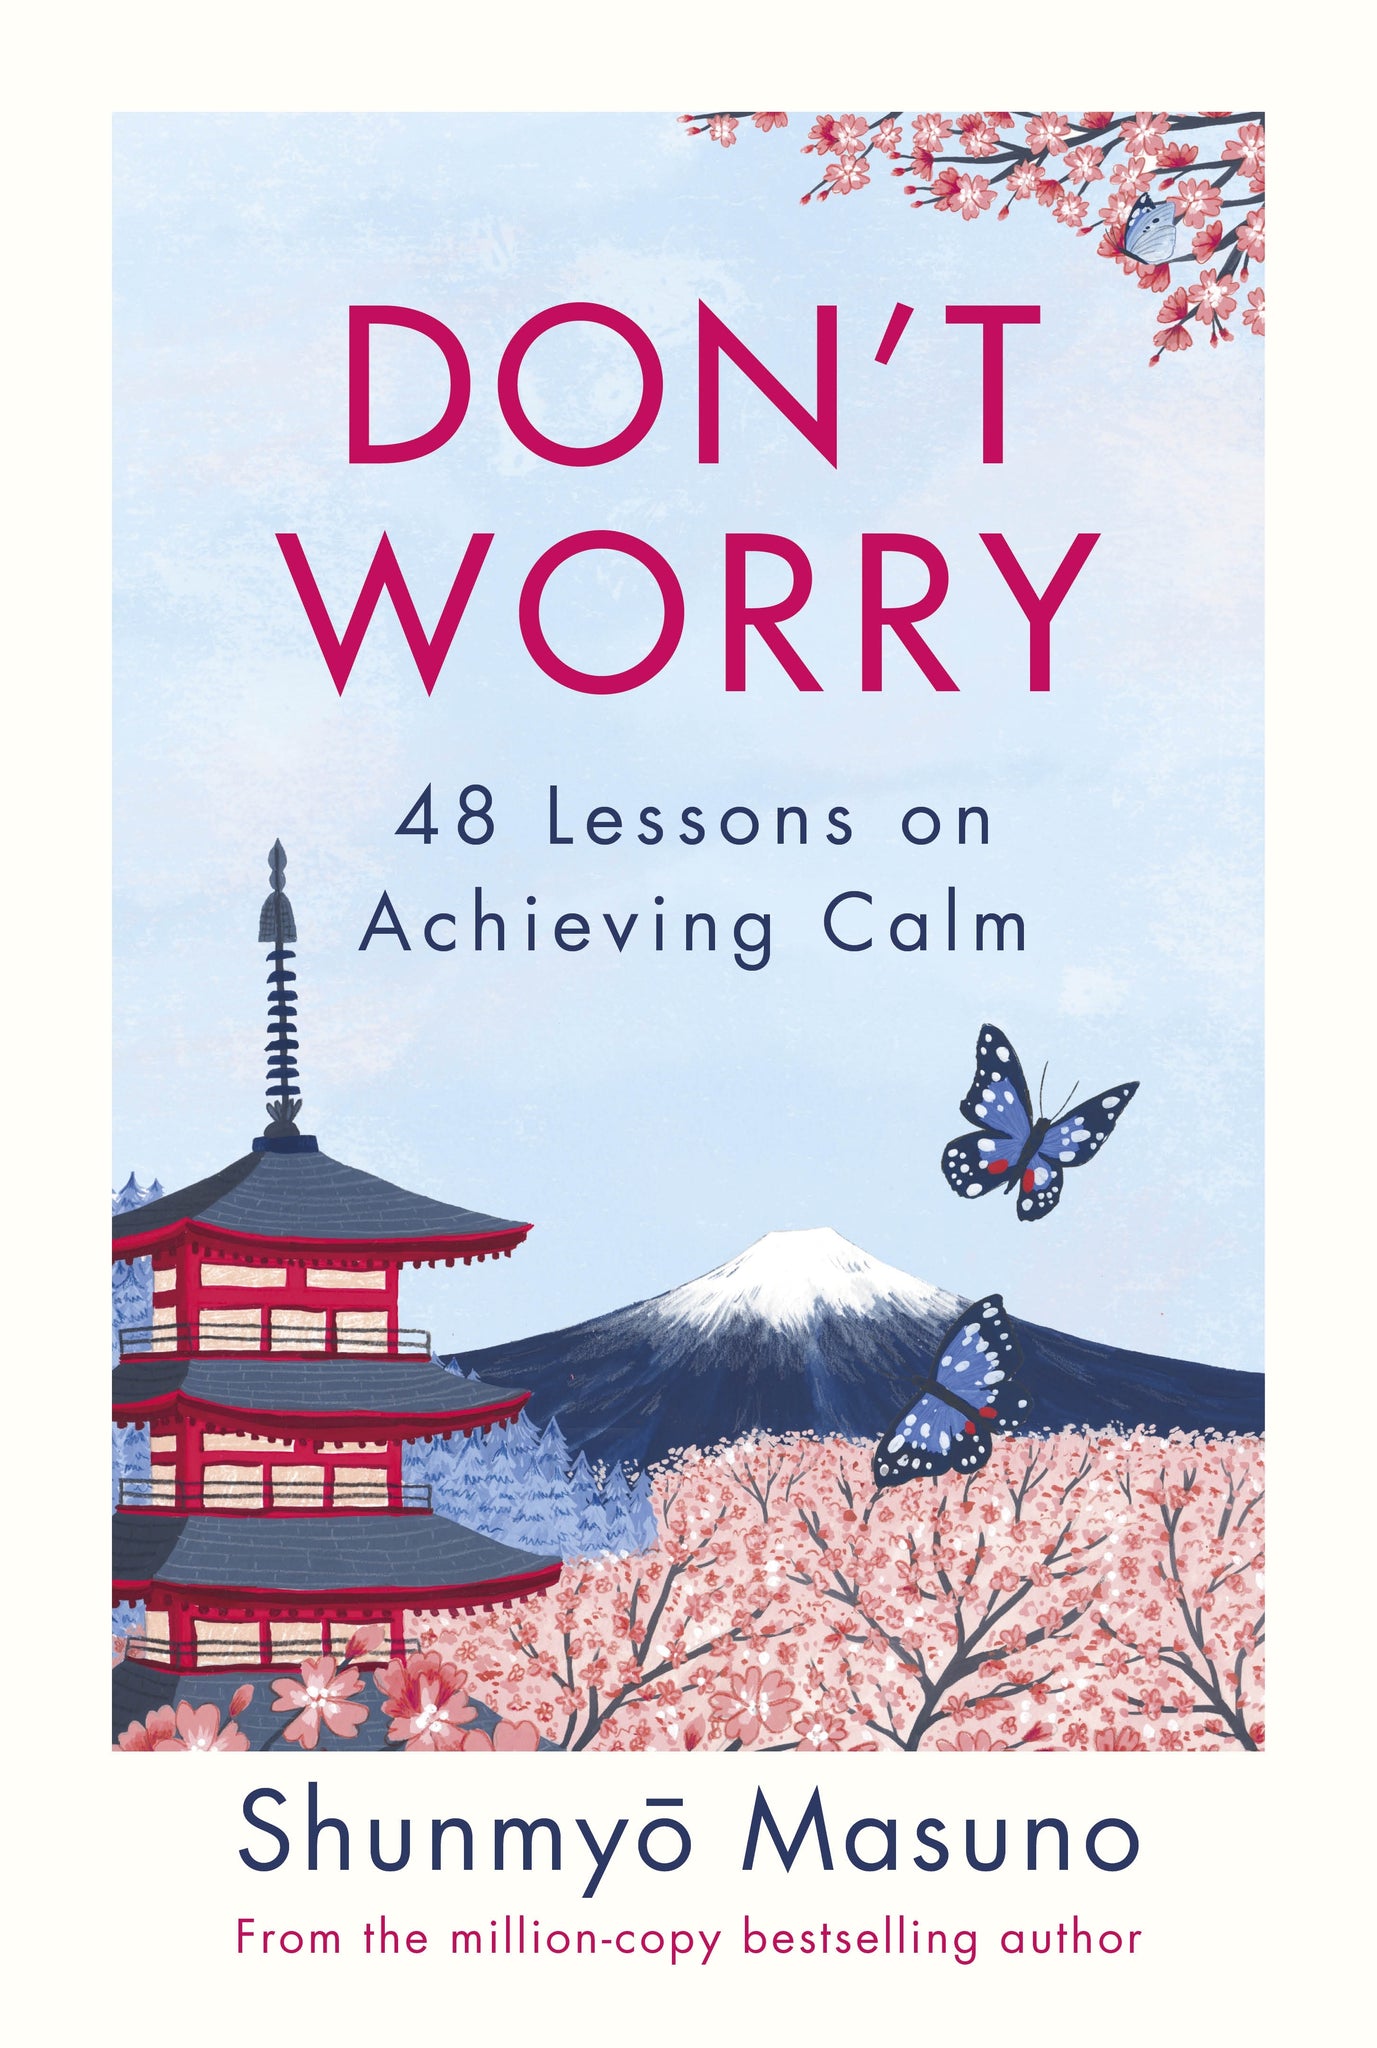 Don't Worry: 48 Lessons on Achieving Calm by Shunmyō Masuno